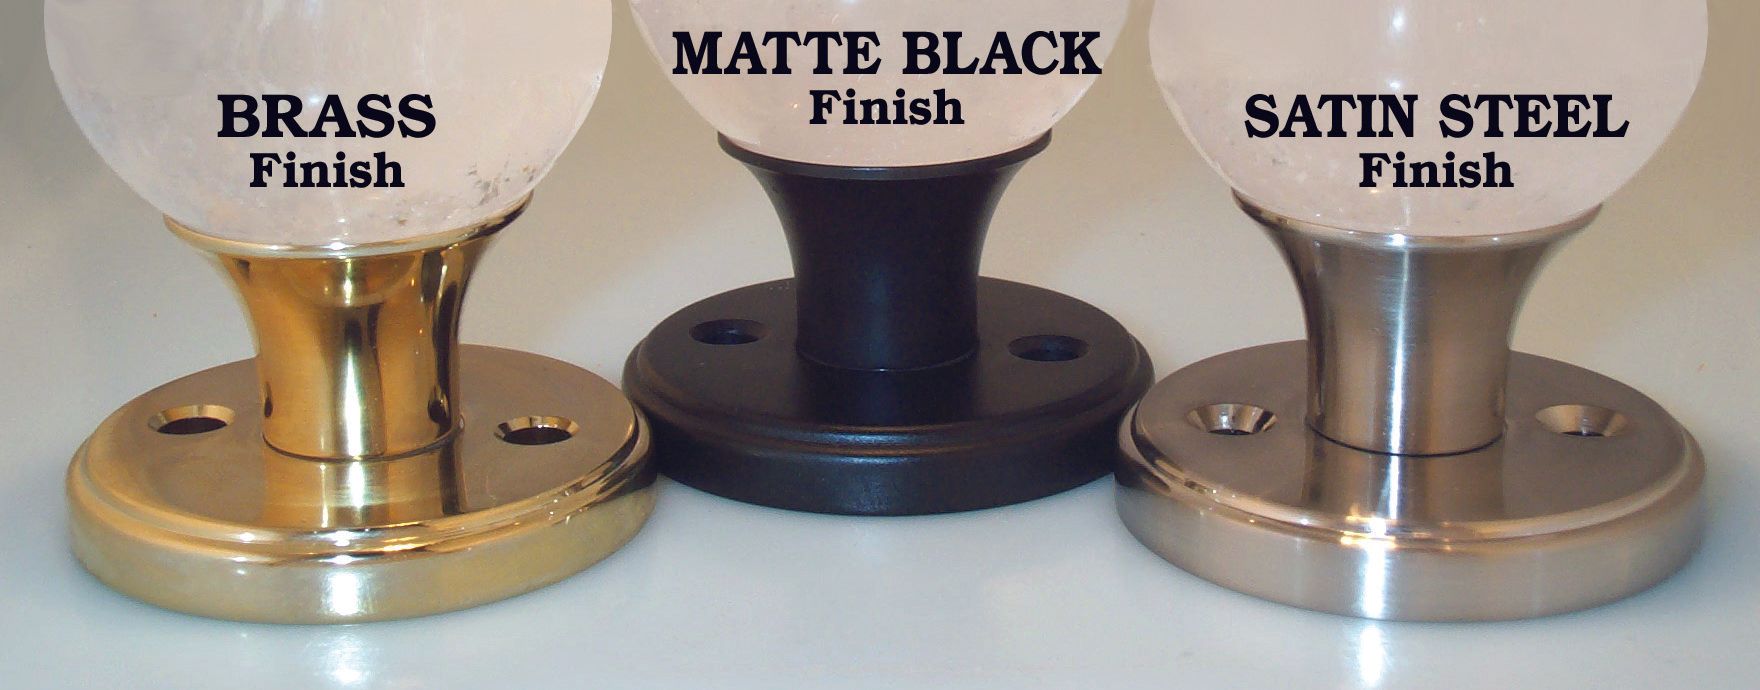 Entry Knobs come in 3 finishes